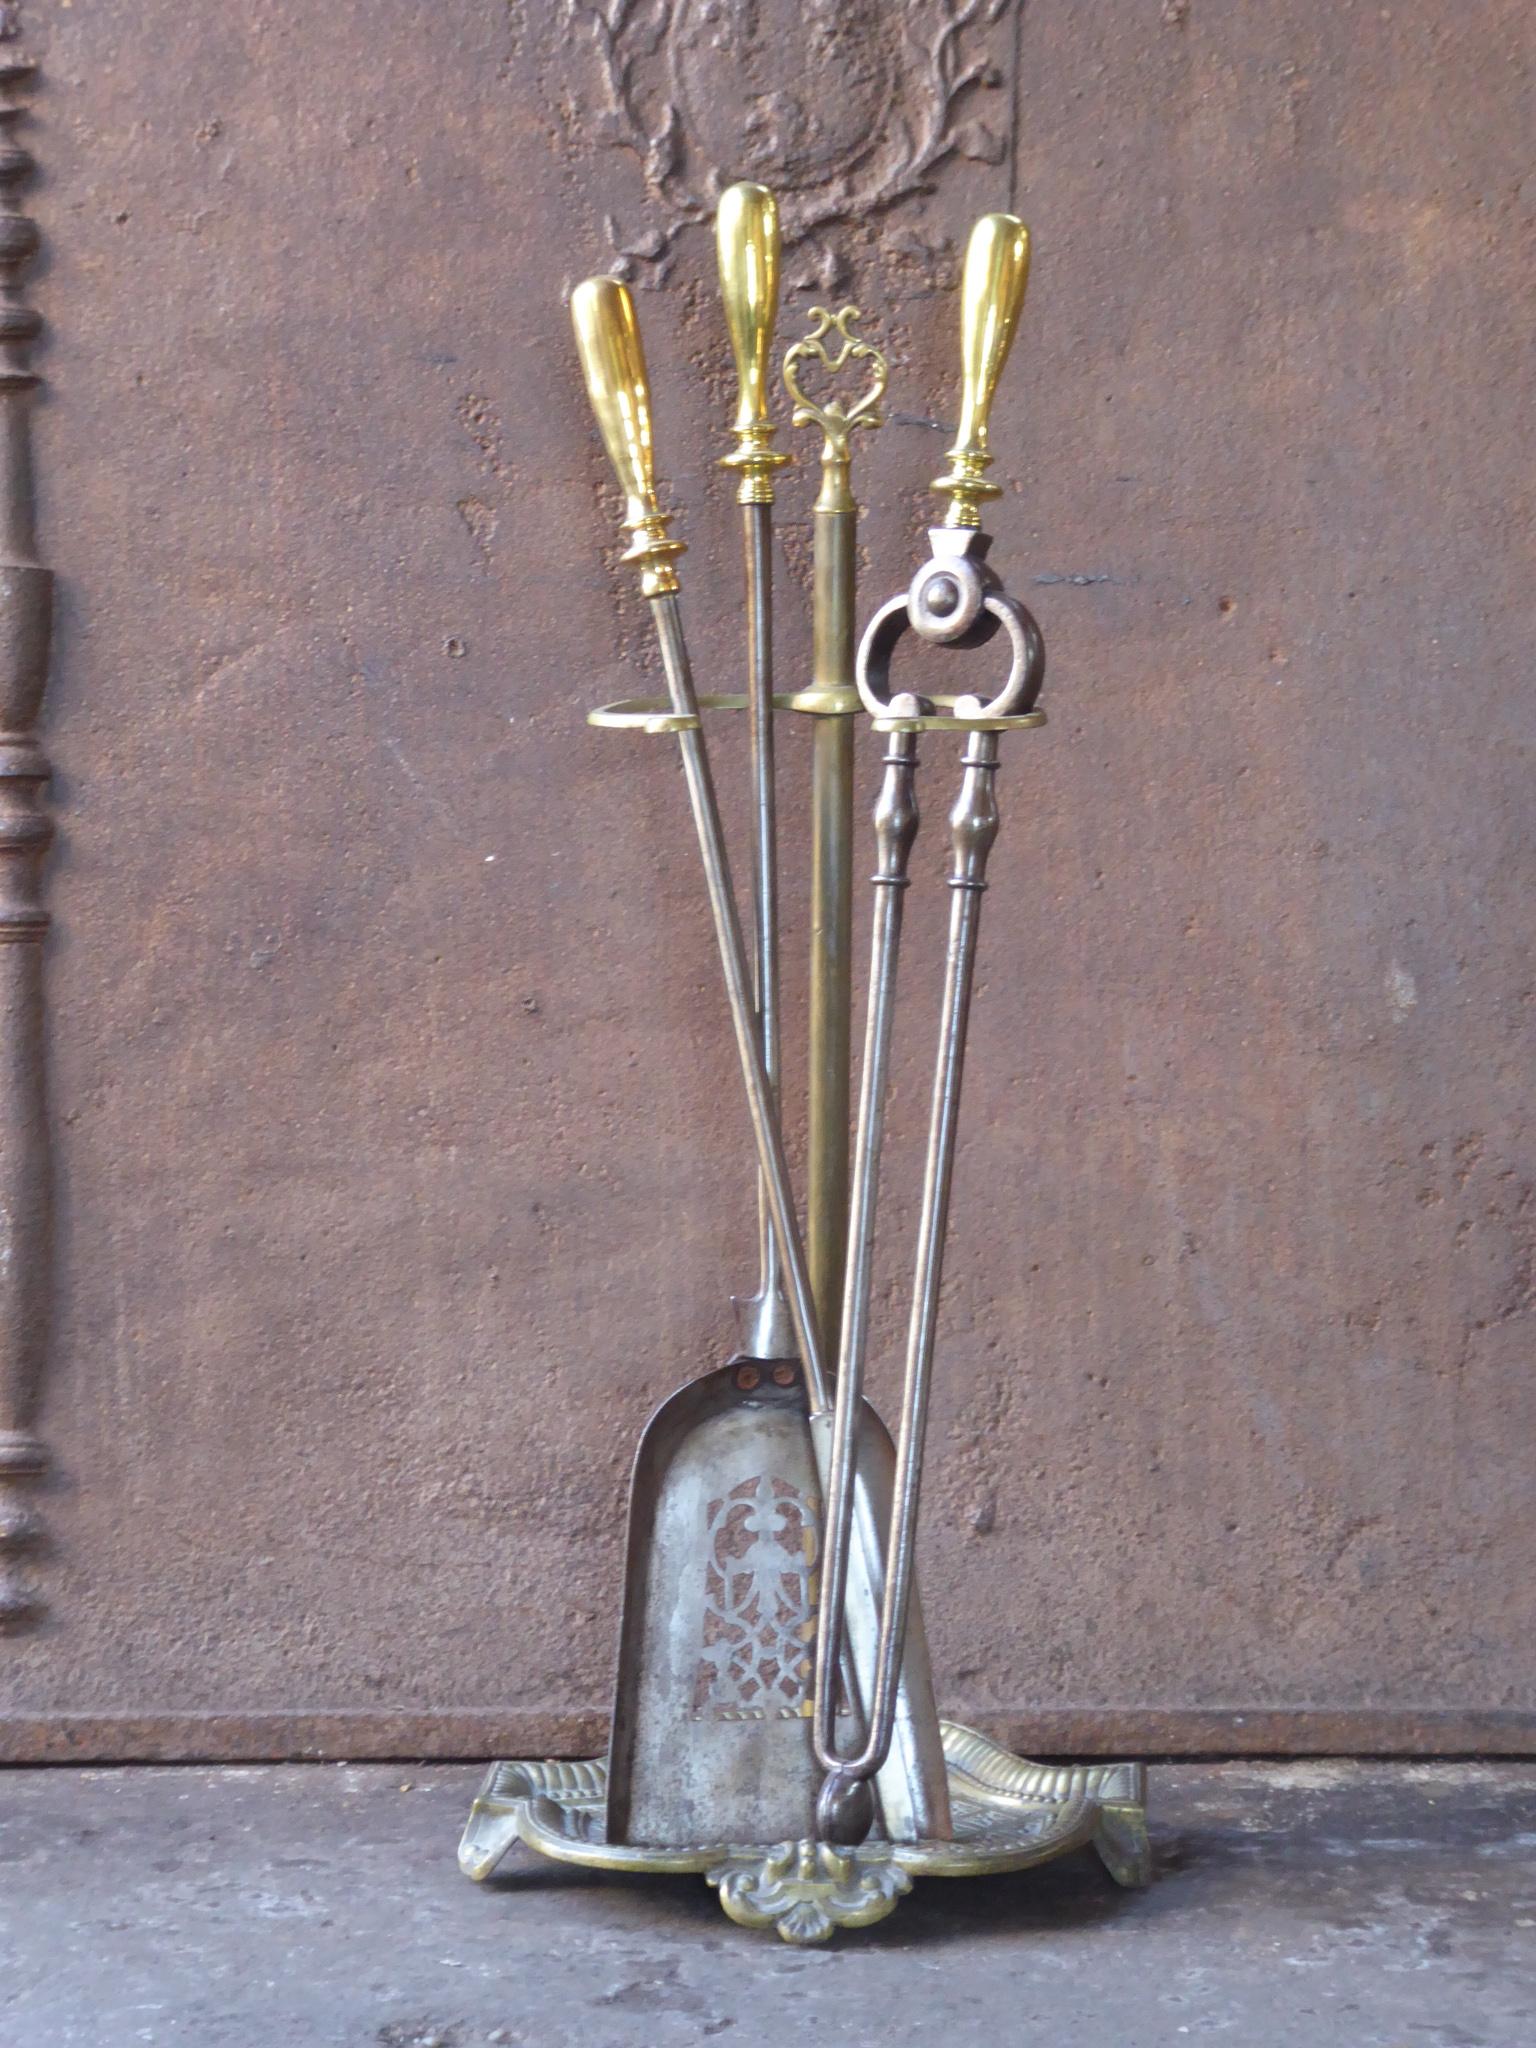 Beautiful set of three Georgian fireplace tools and a stand, made of steel and brass. Made in England, 18th-19th century. The companion set is in a good condition and is fully functional.








